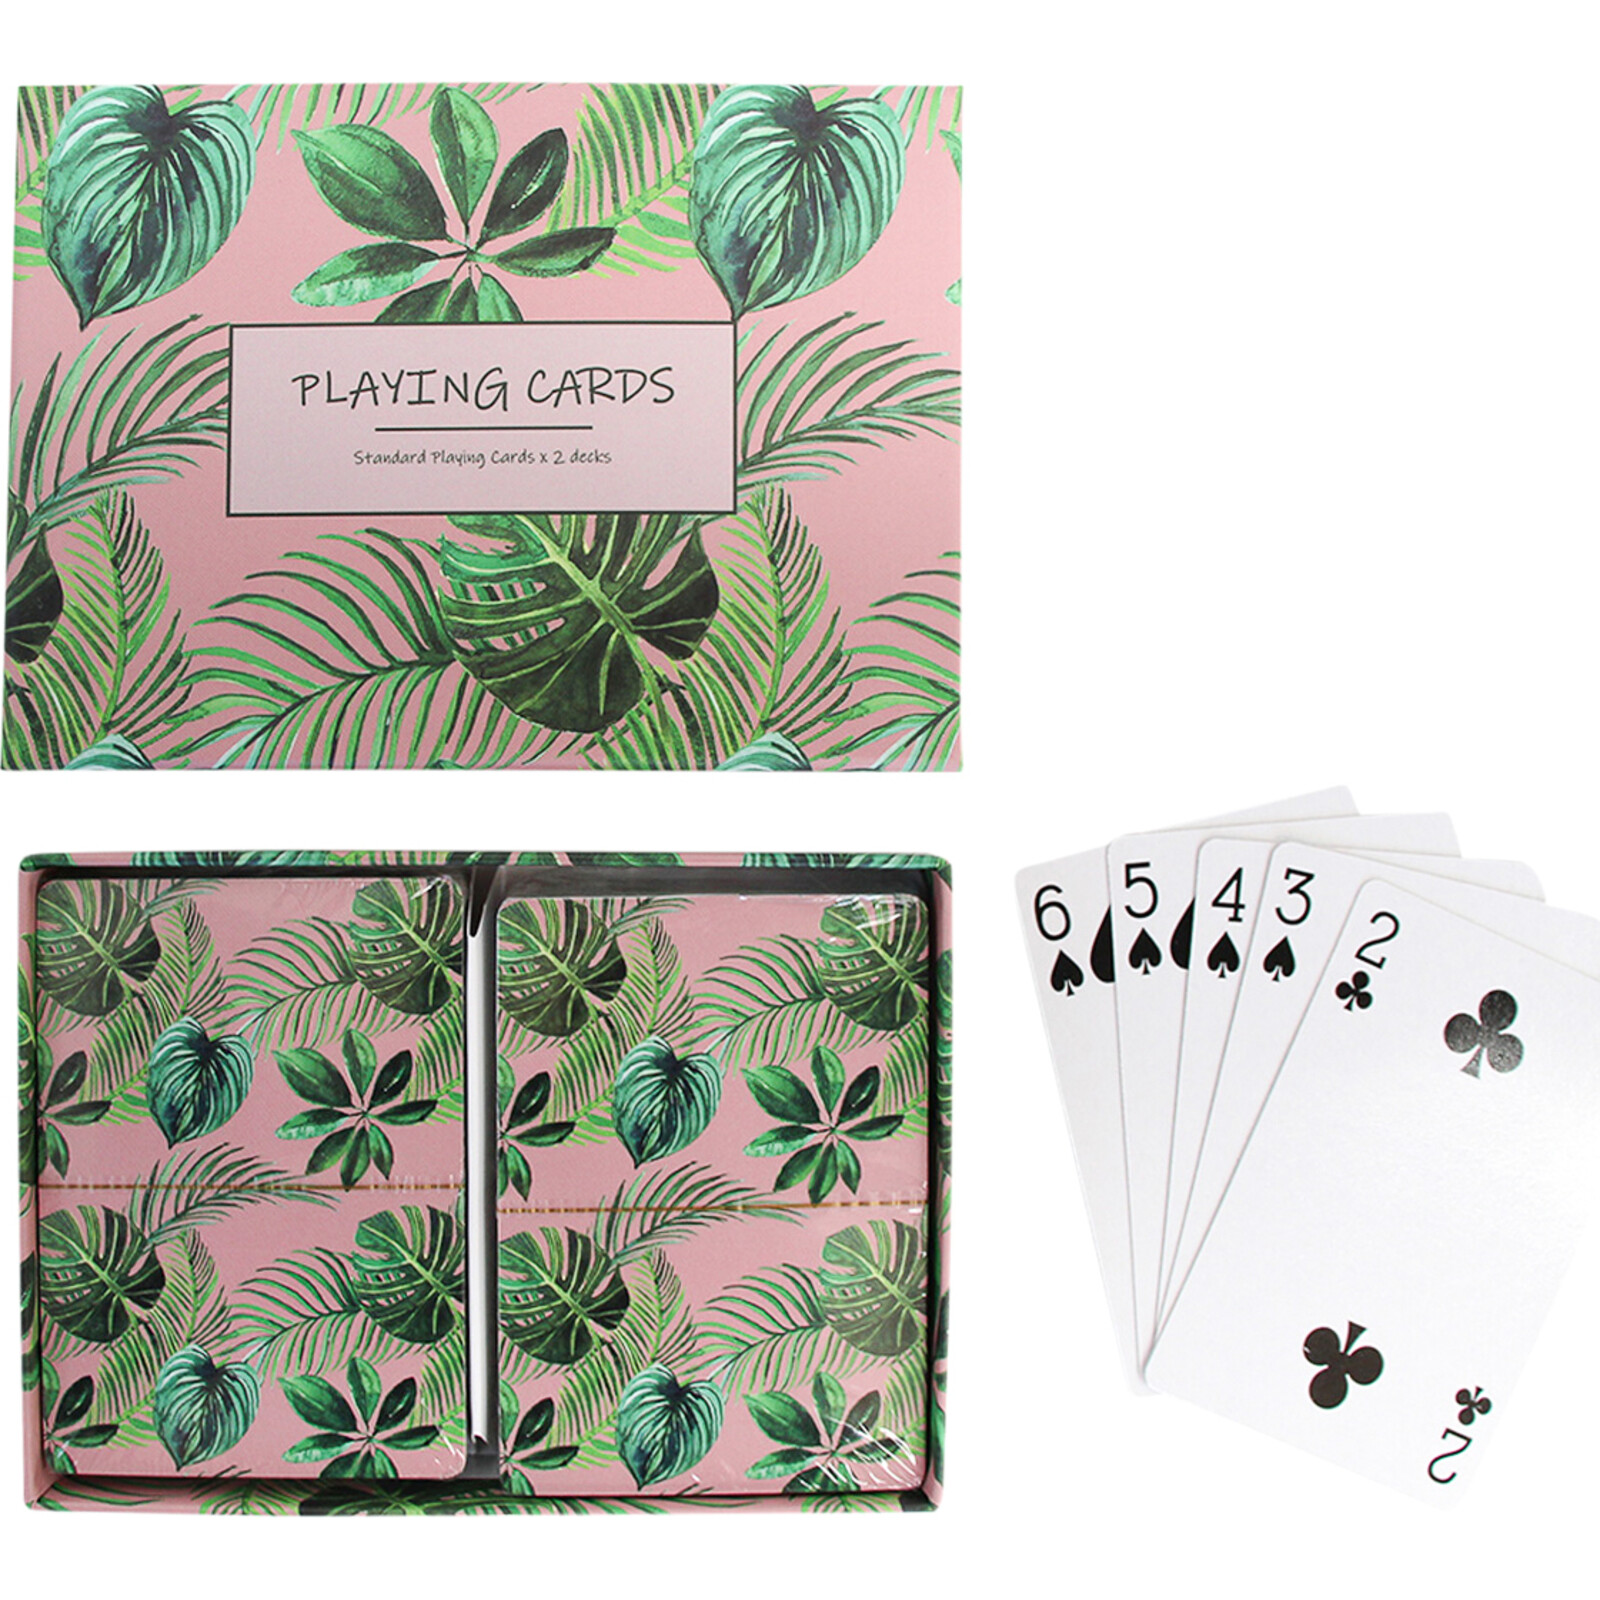 Playing Cards Rainforest